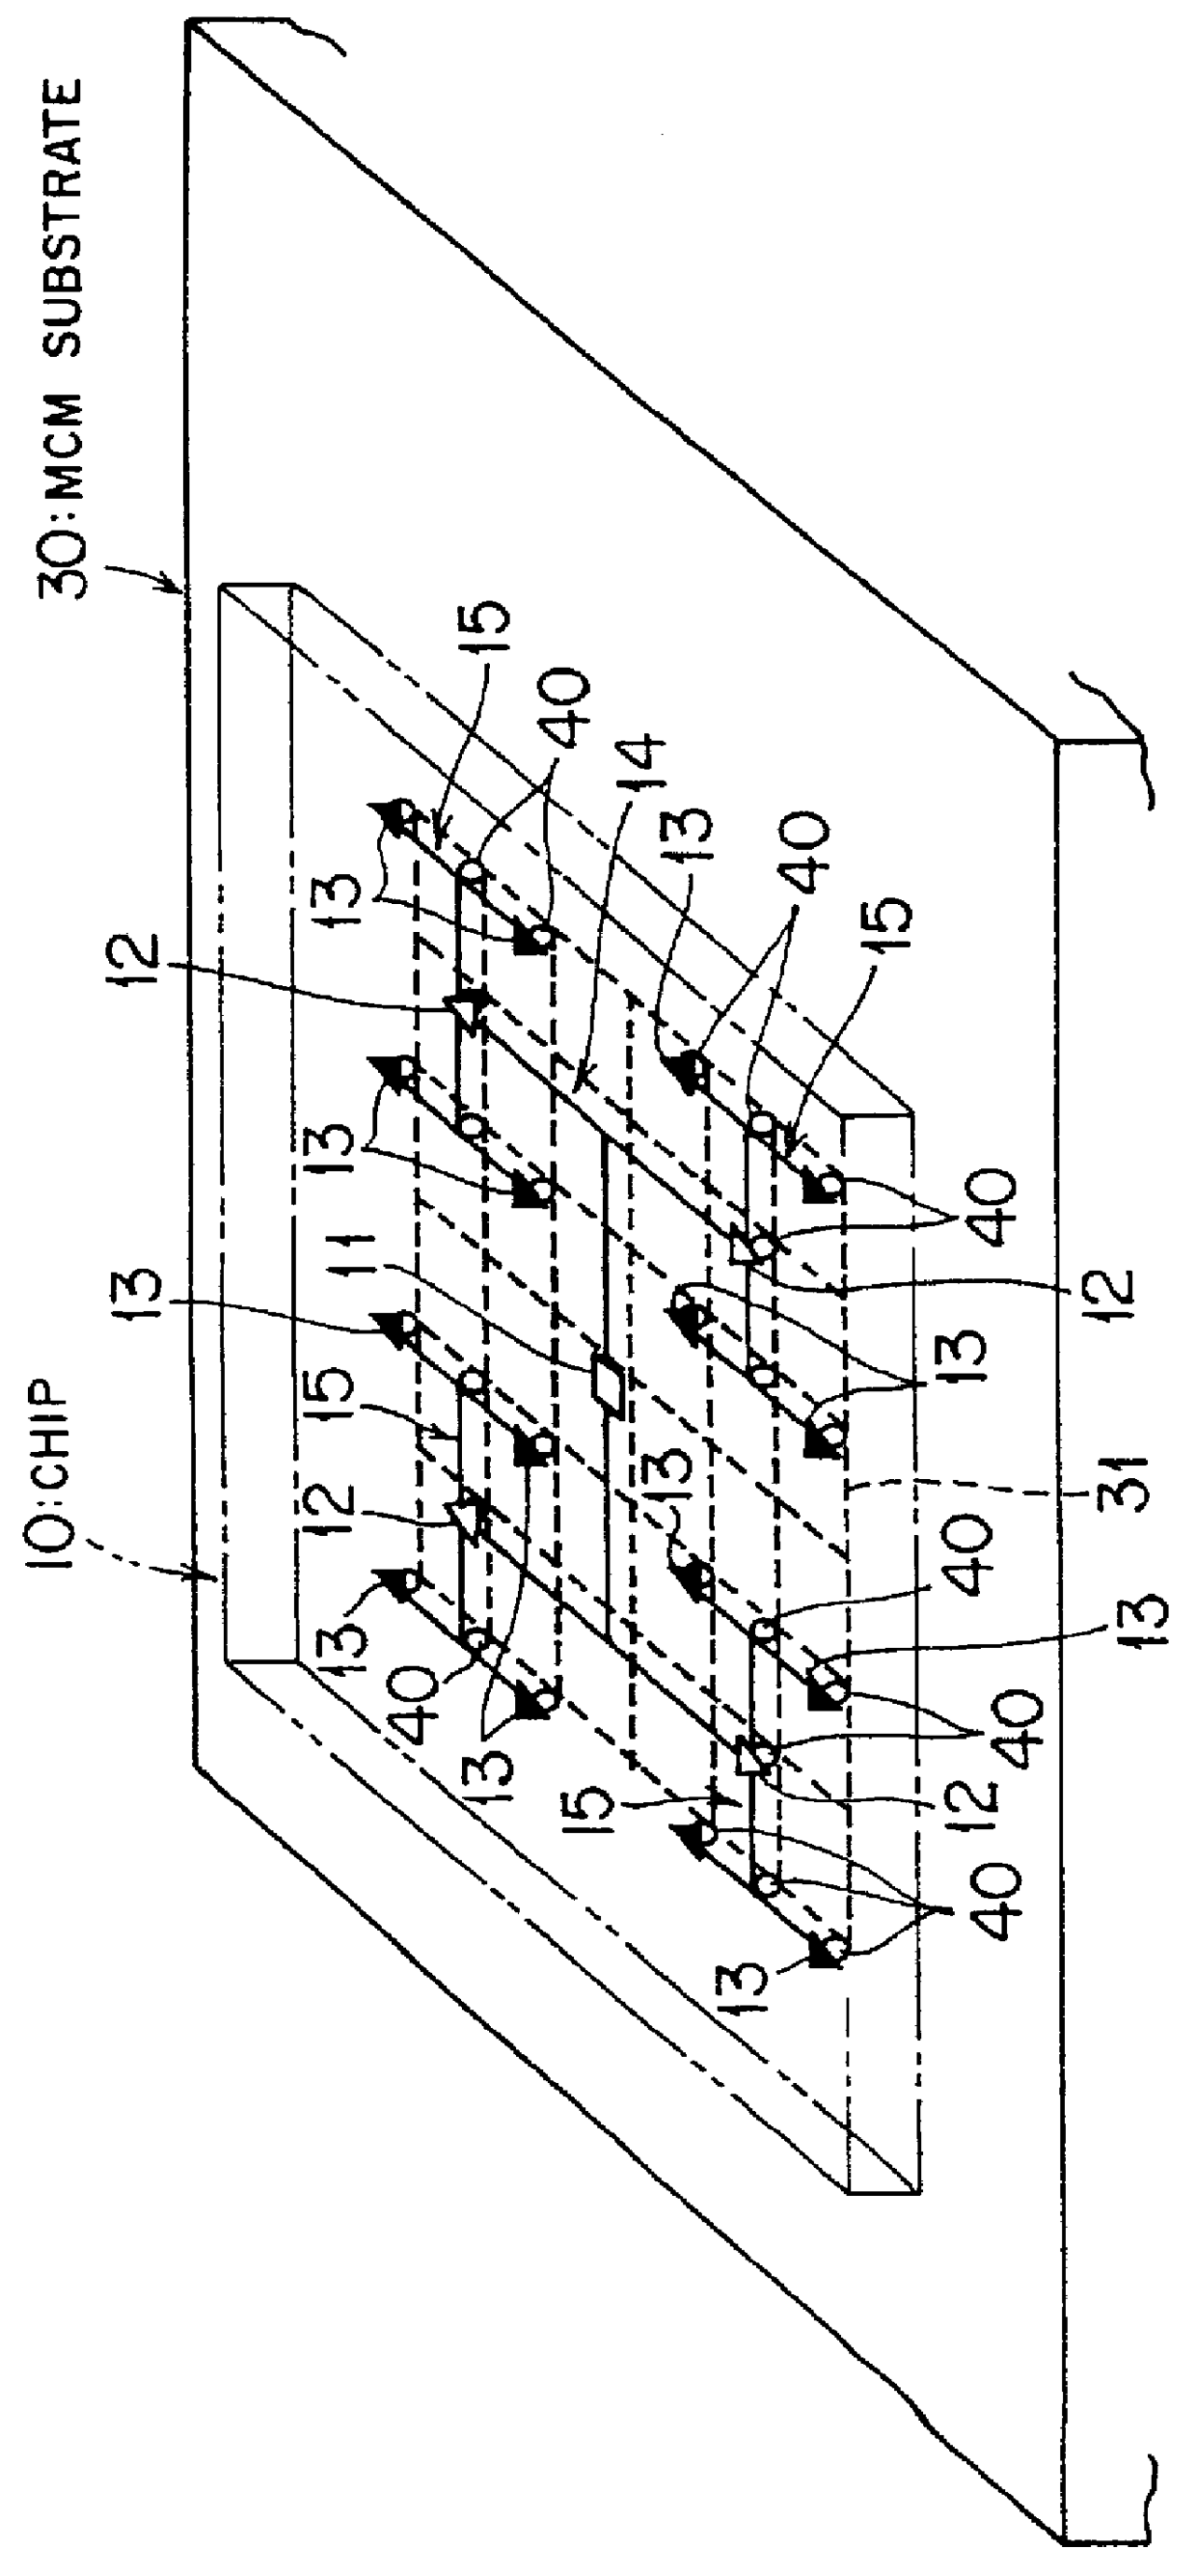 Clock distribution circuit in a semiconductor integrated circuit